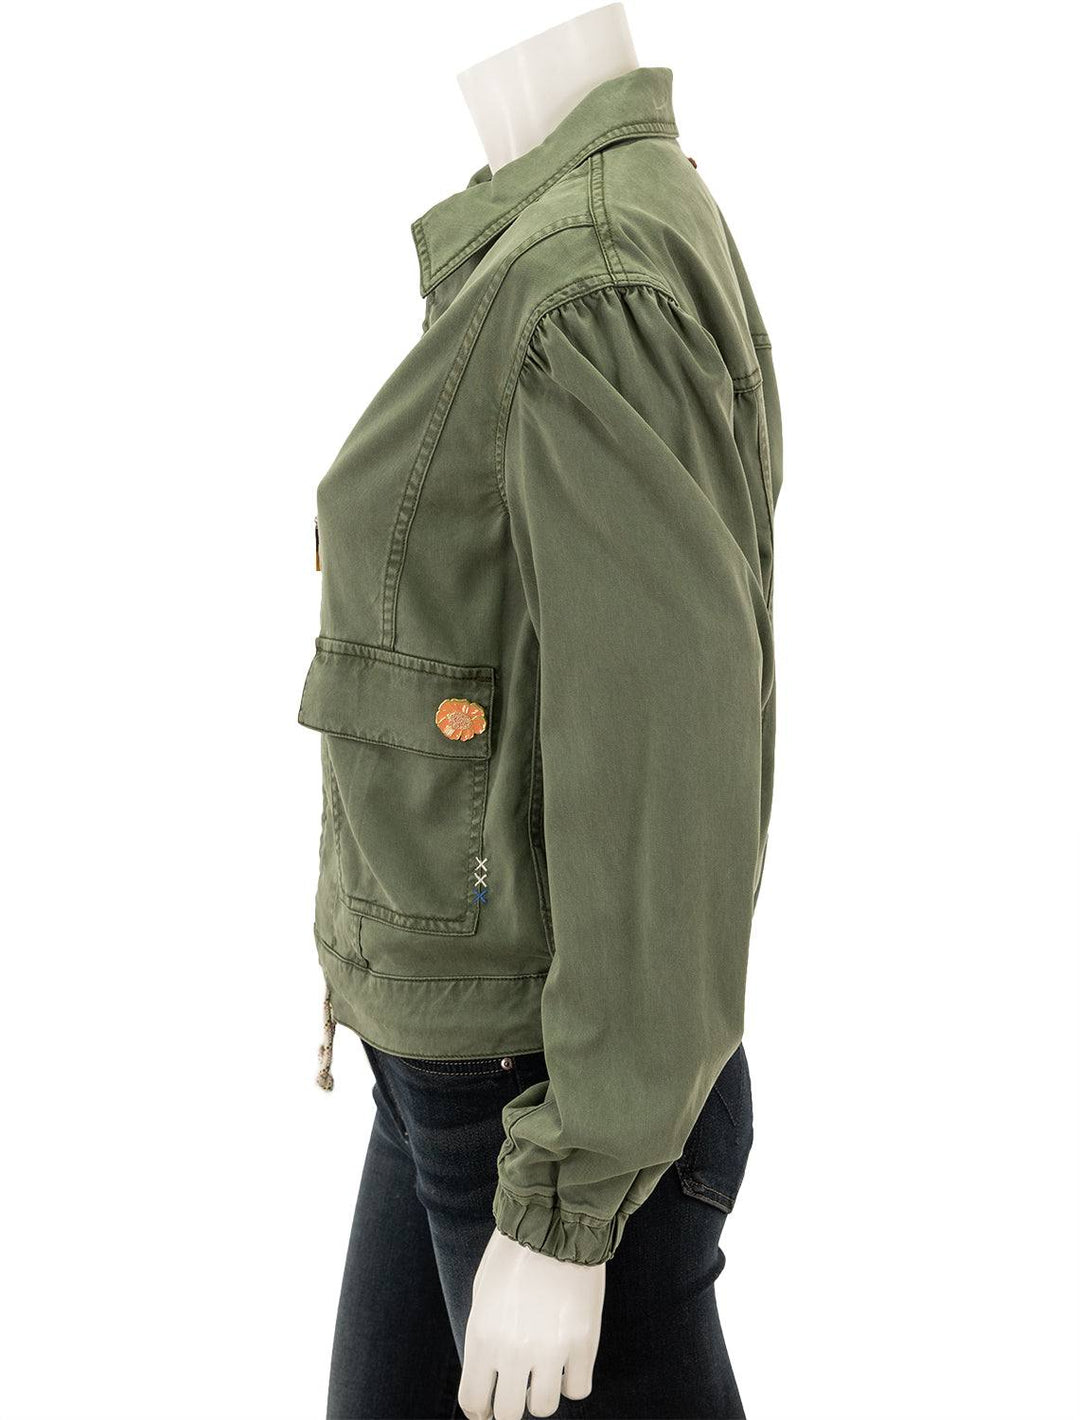 Side view of Scotch & Soda's utility jacket in olive green.